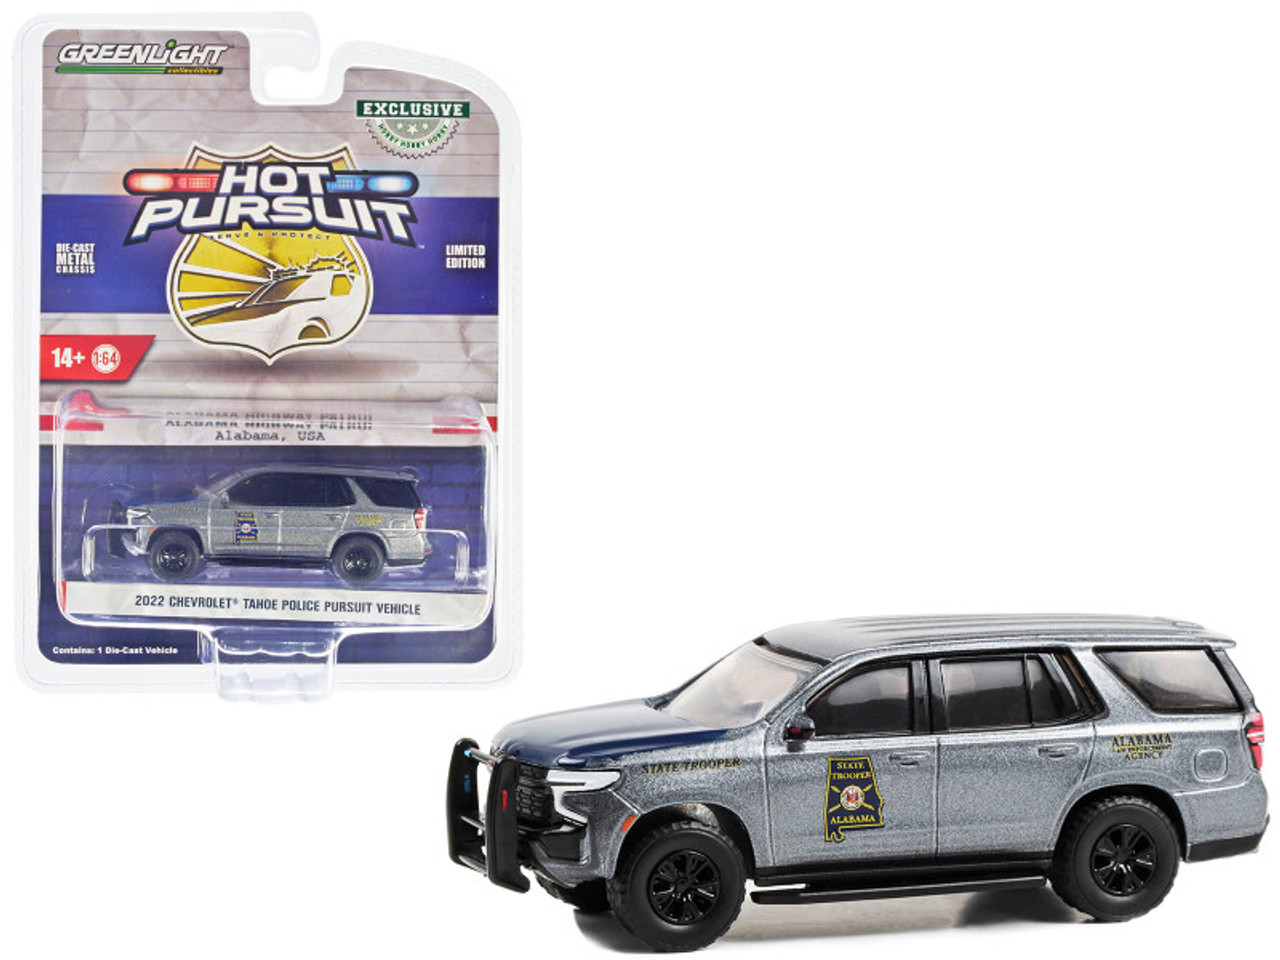 2022 Chevrolet Tahoe Police Pursuit Vehicle (PPV) Gray Metallic with Blue Hood and Rear Gate "Alabama Highway Patrol State Trooper" "Hobby Exclusive" Series 1/64 Diecast Model Car by Greenlight